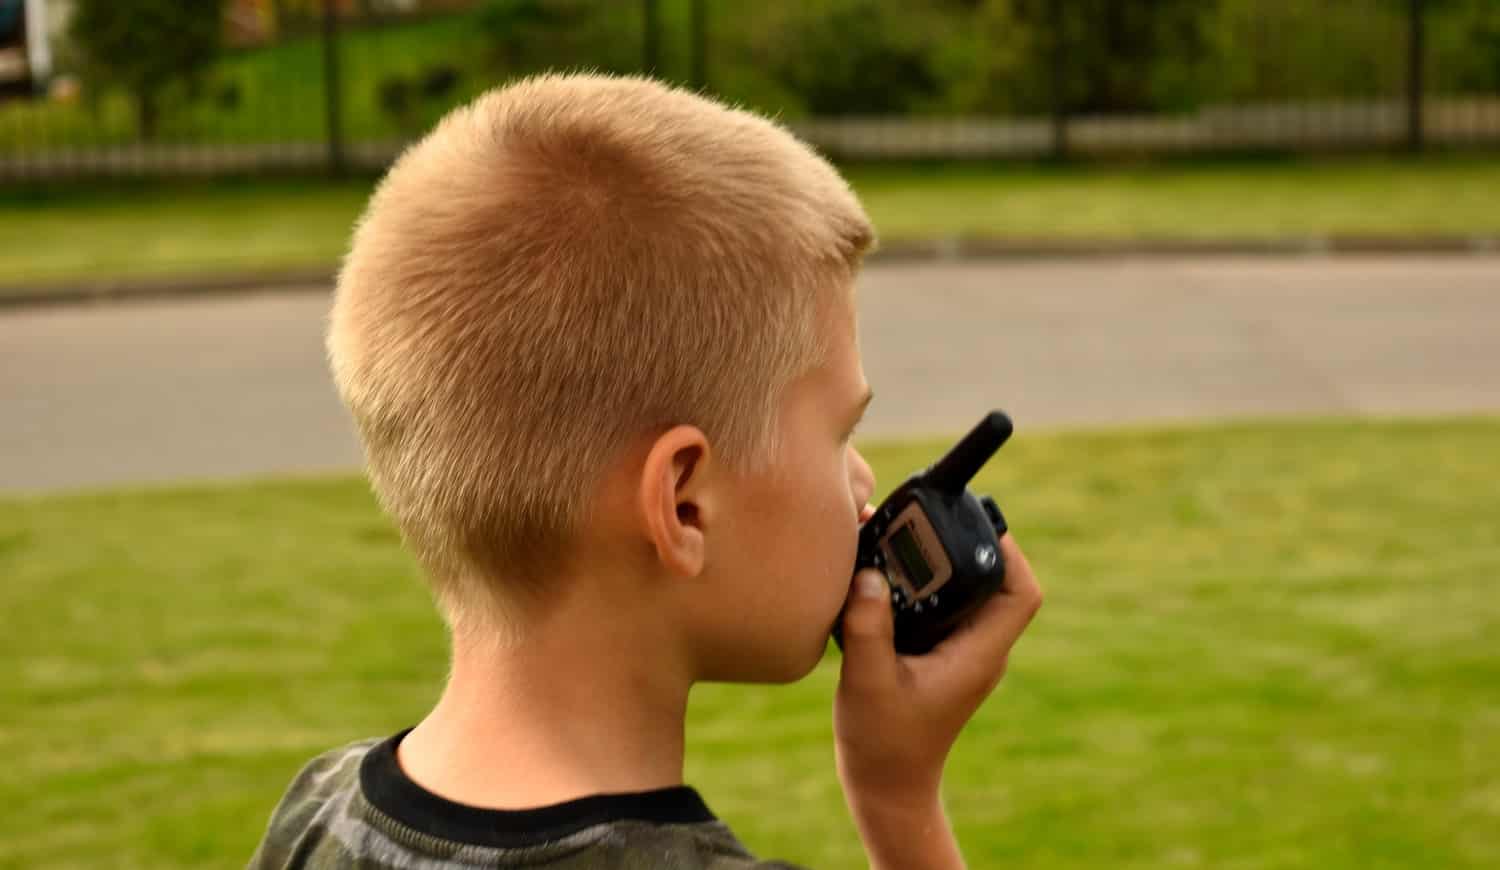 Children's toy walkie-talkie in hand. The child plays in the fresh air.